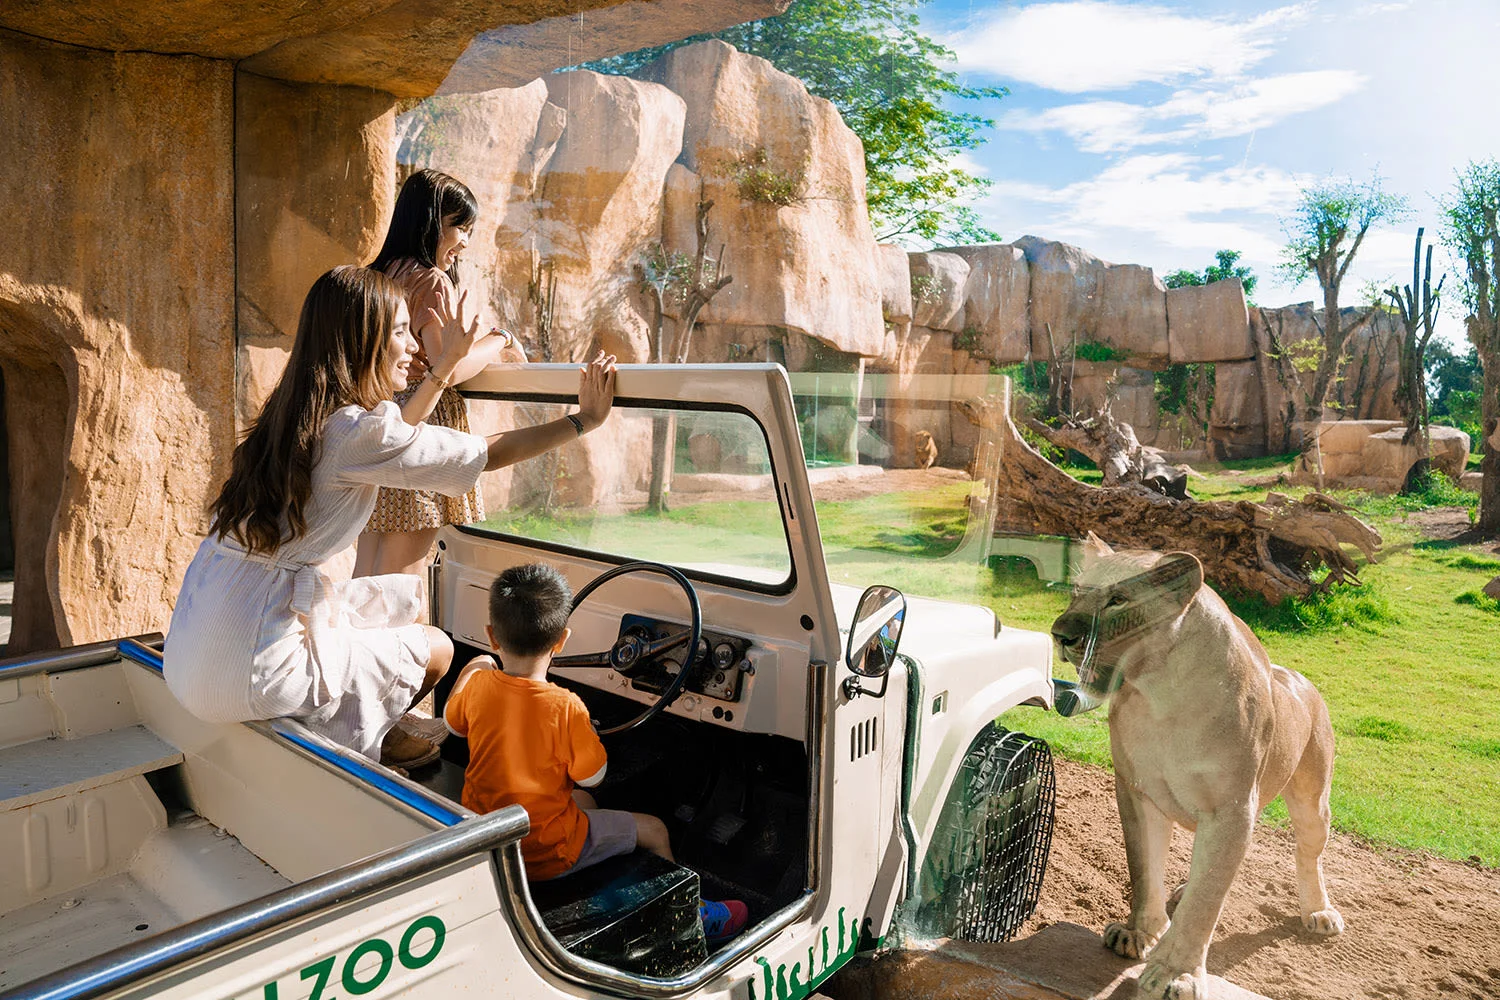 Bali Zoo Park Tickets for International Visitors